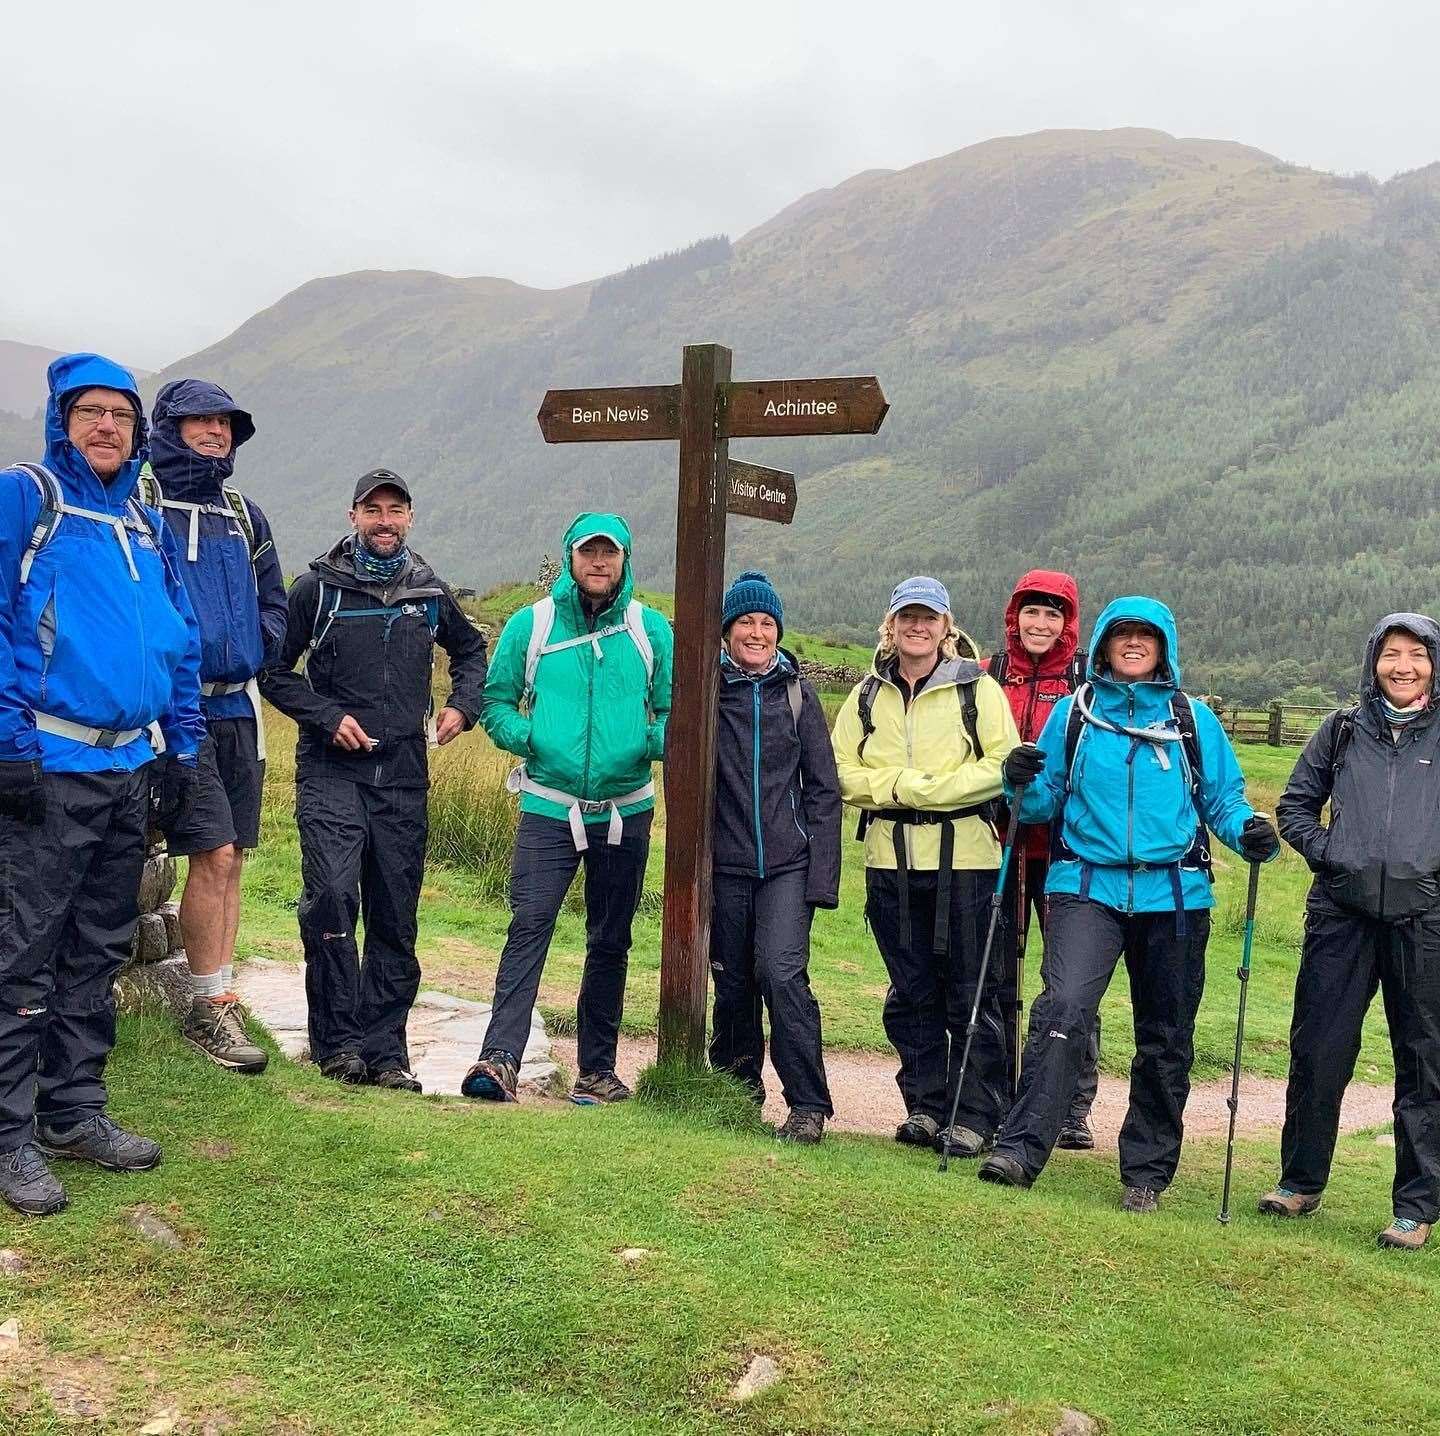 The team before they tackled Ben Nevis on a rainy day.